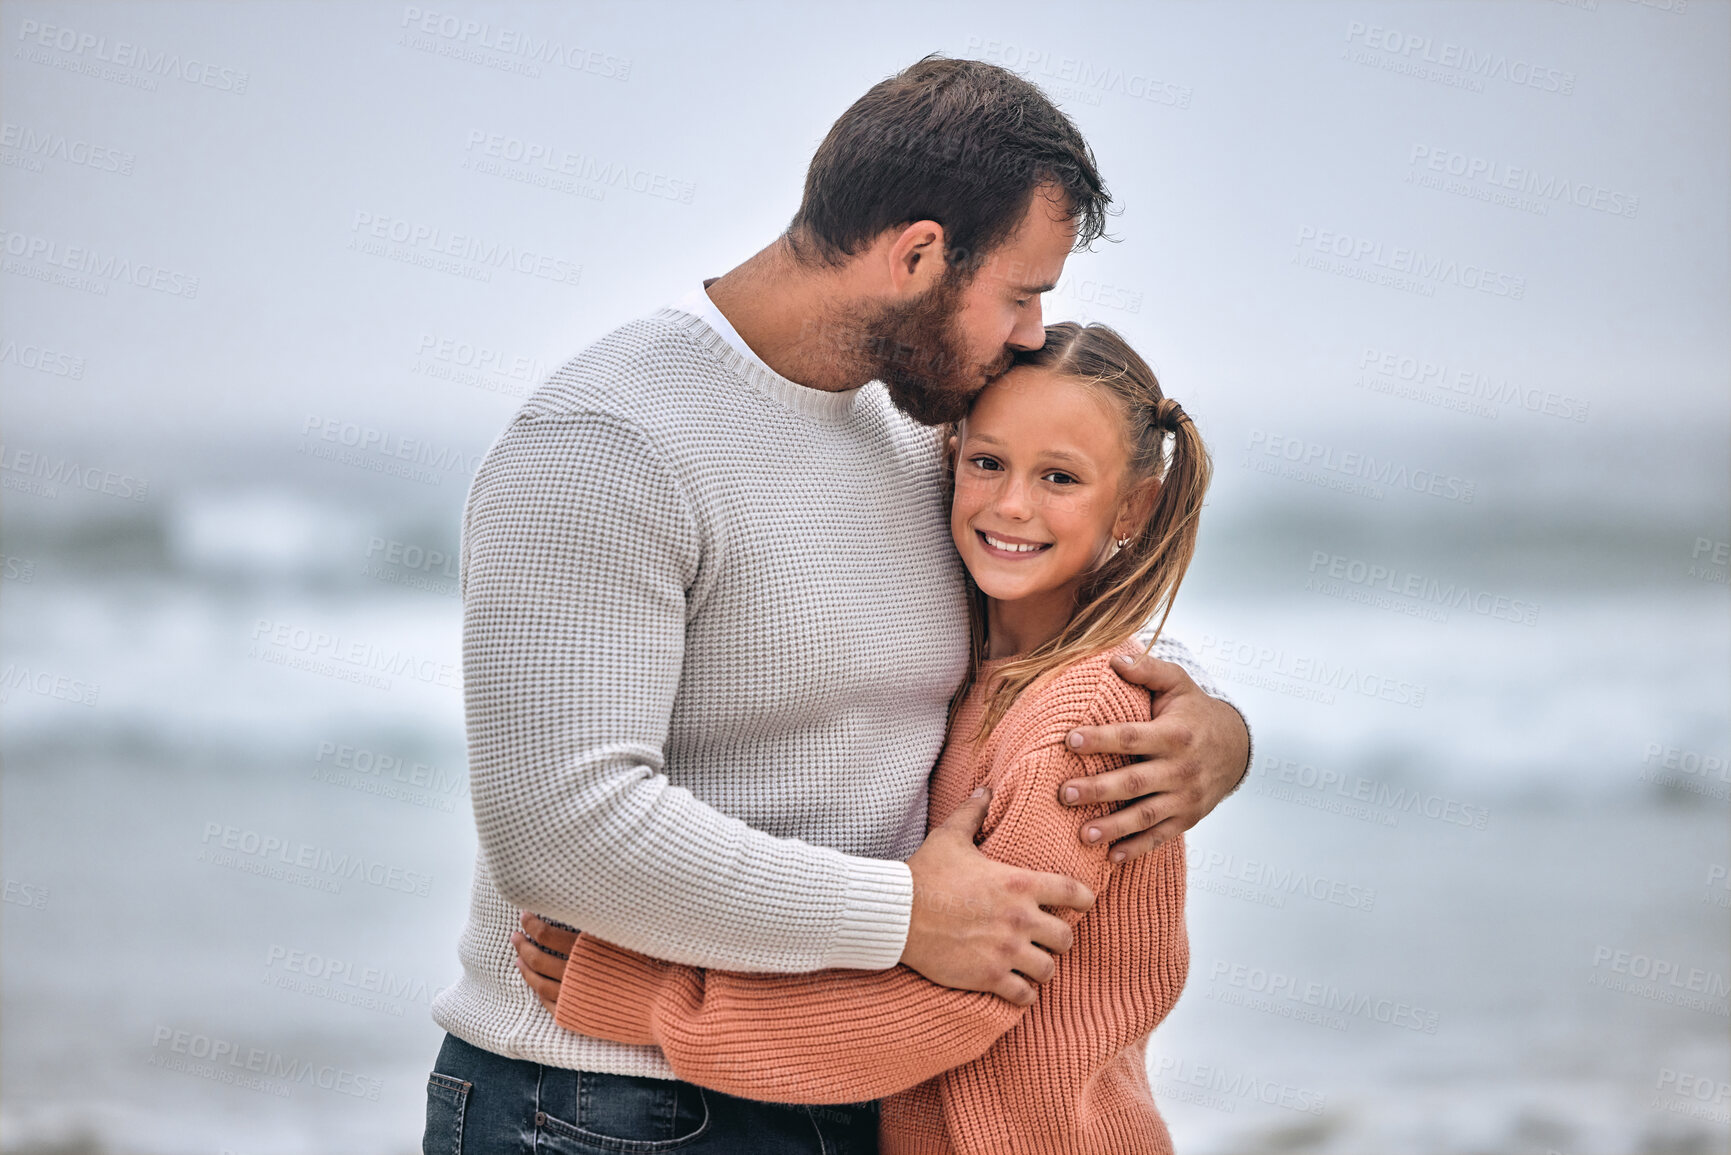 Buy stock photo Family, beach and father kiss girl on vacation, holiday or trip outdoors. Love, care and affection hug of dad and kid bonding, having fun and enjoying quality time together on seashore or ocean coast